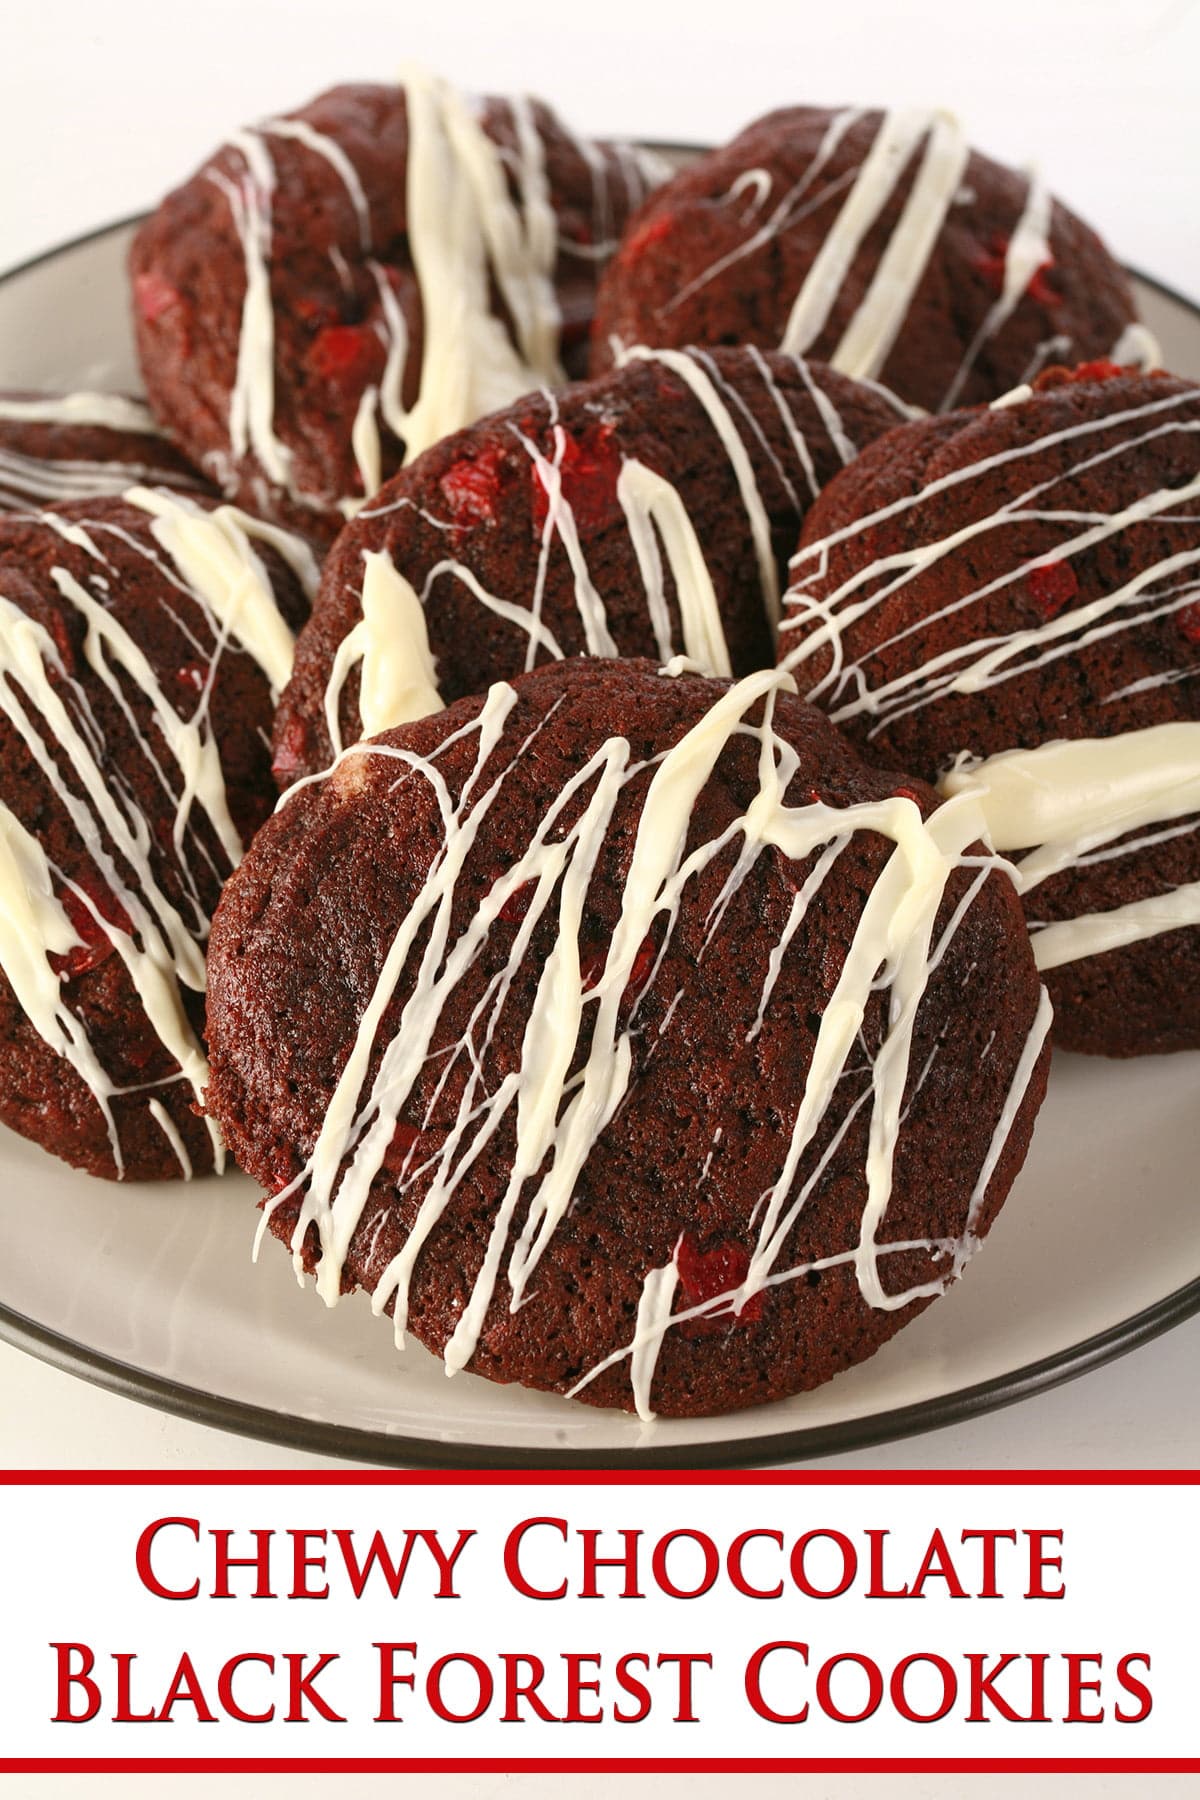 A plate of chewy chocolate black forest cookies, studded with bits of maraschino cherry and drizzled in white chocolate.